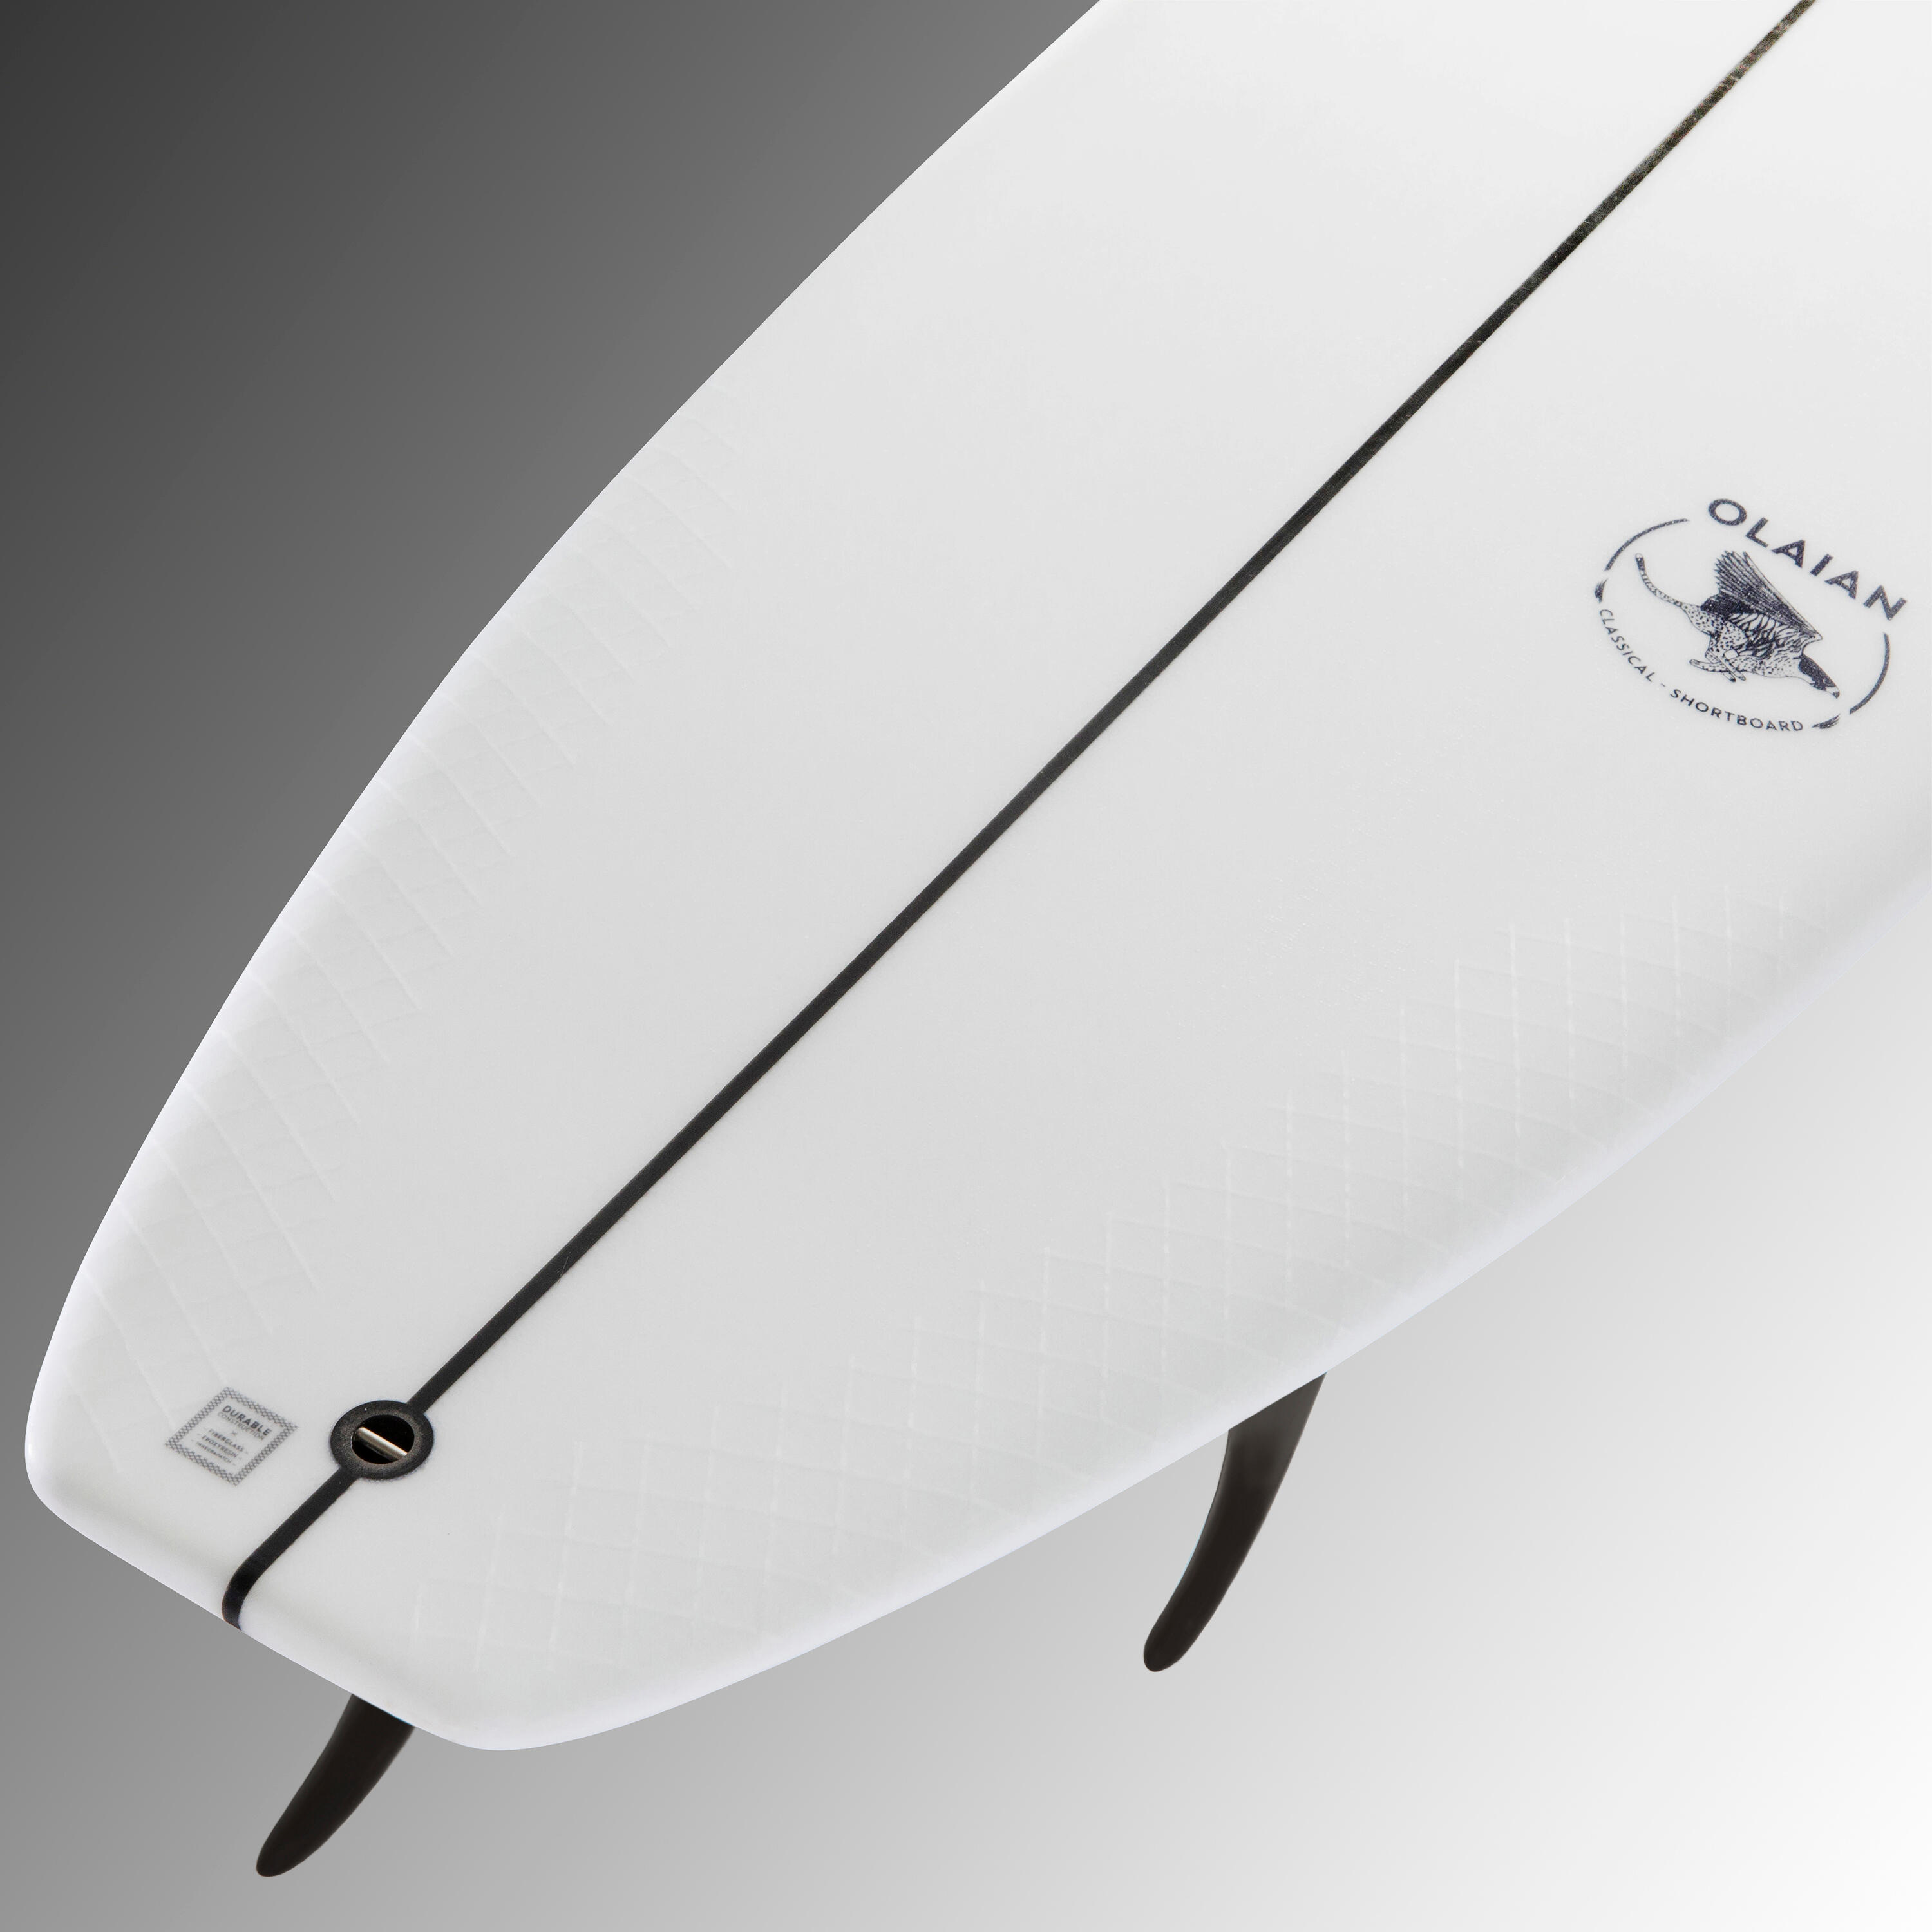 SHORTBOARD 900 6'1" 33 L. Supplied with 3 FCS2 fins 9/15